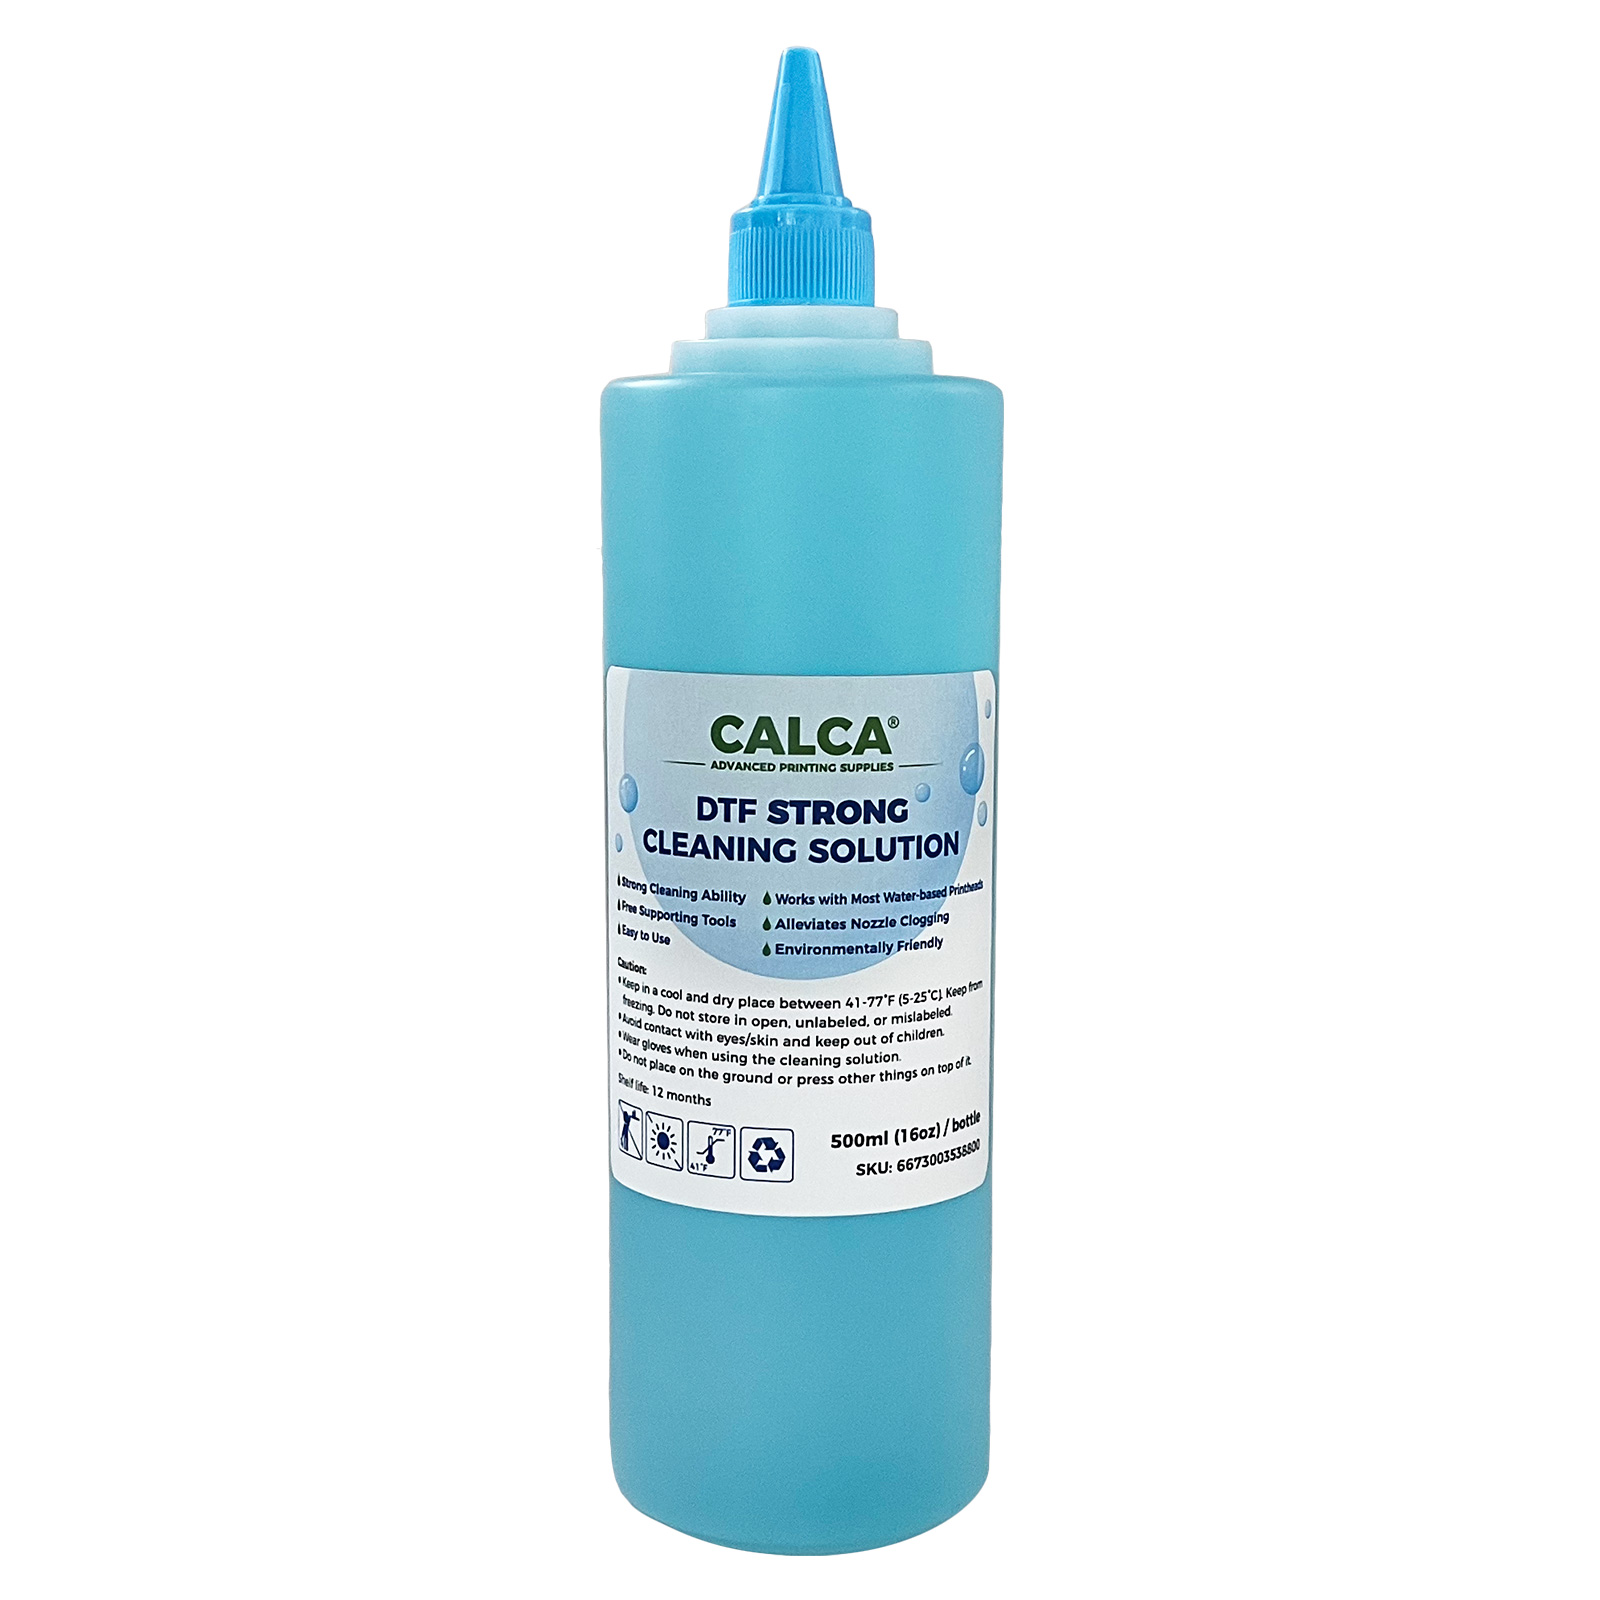 Water-based Strong Cleaning Solution for CALCA DTF Printers. 16 oz, Bottle of 500ml